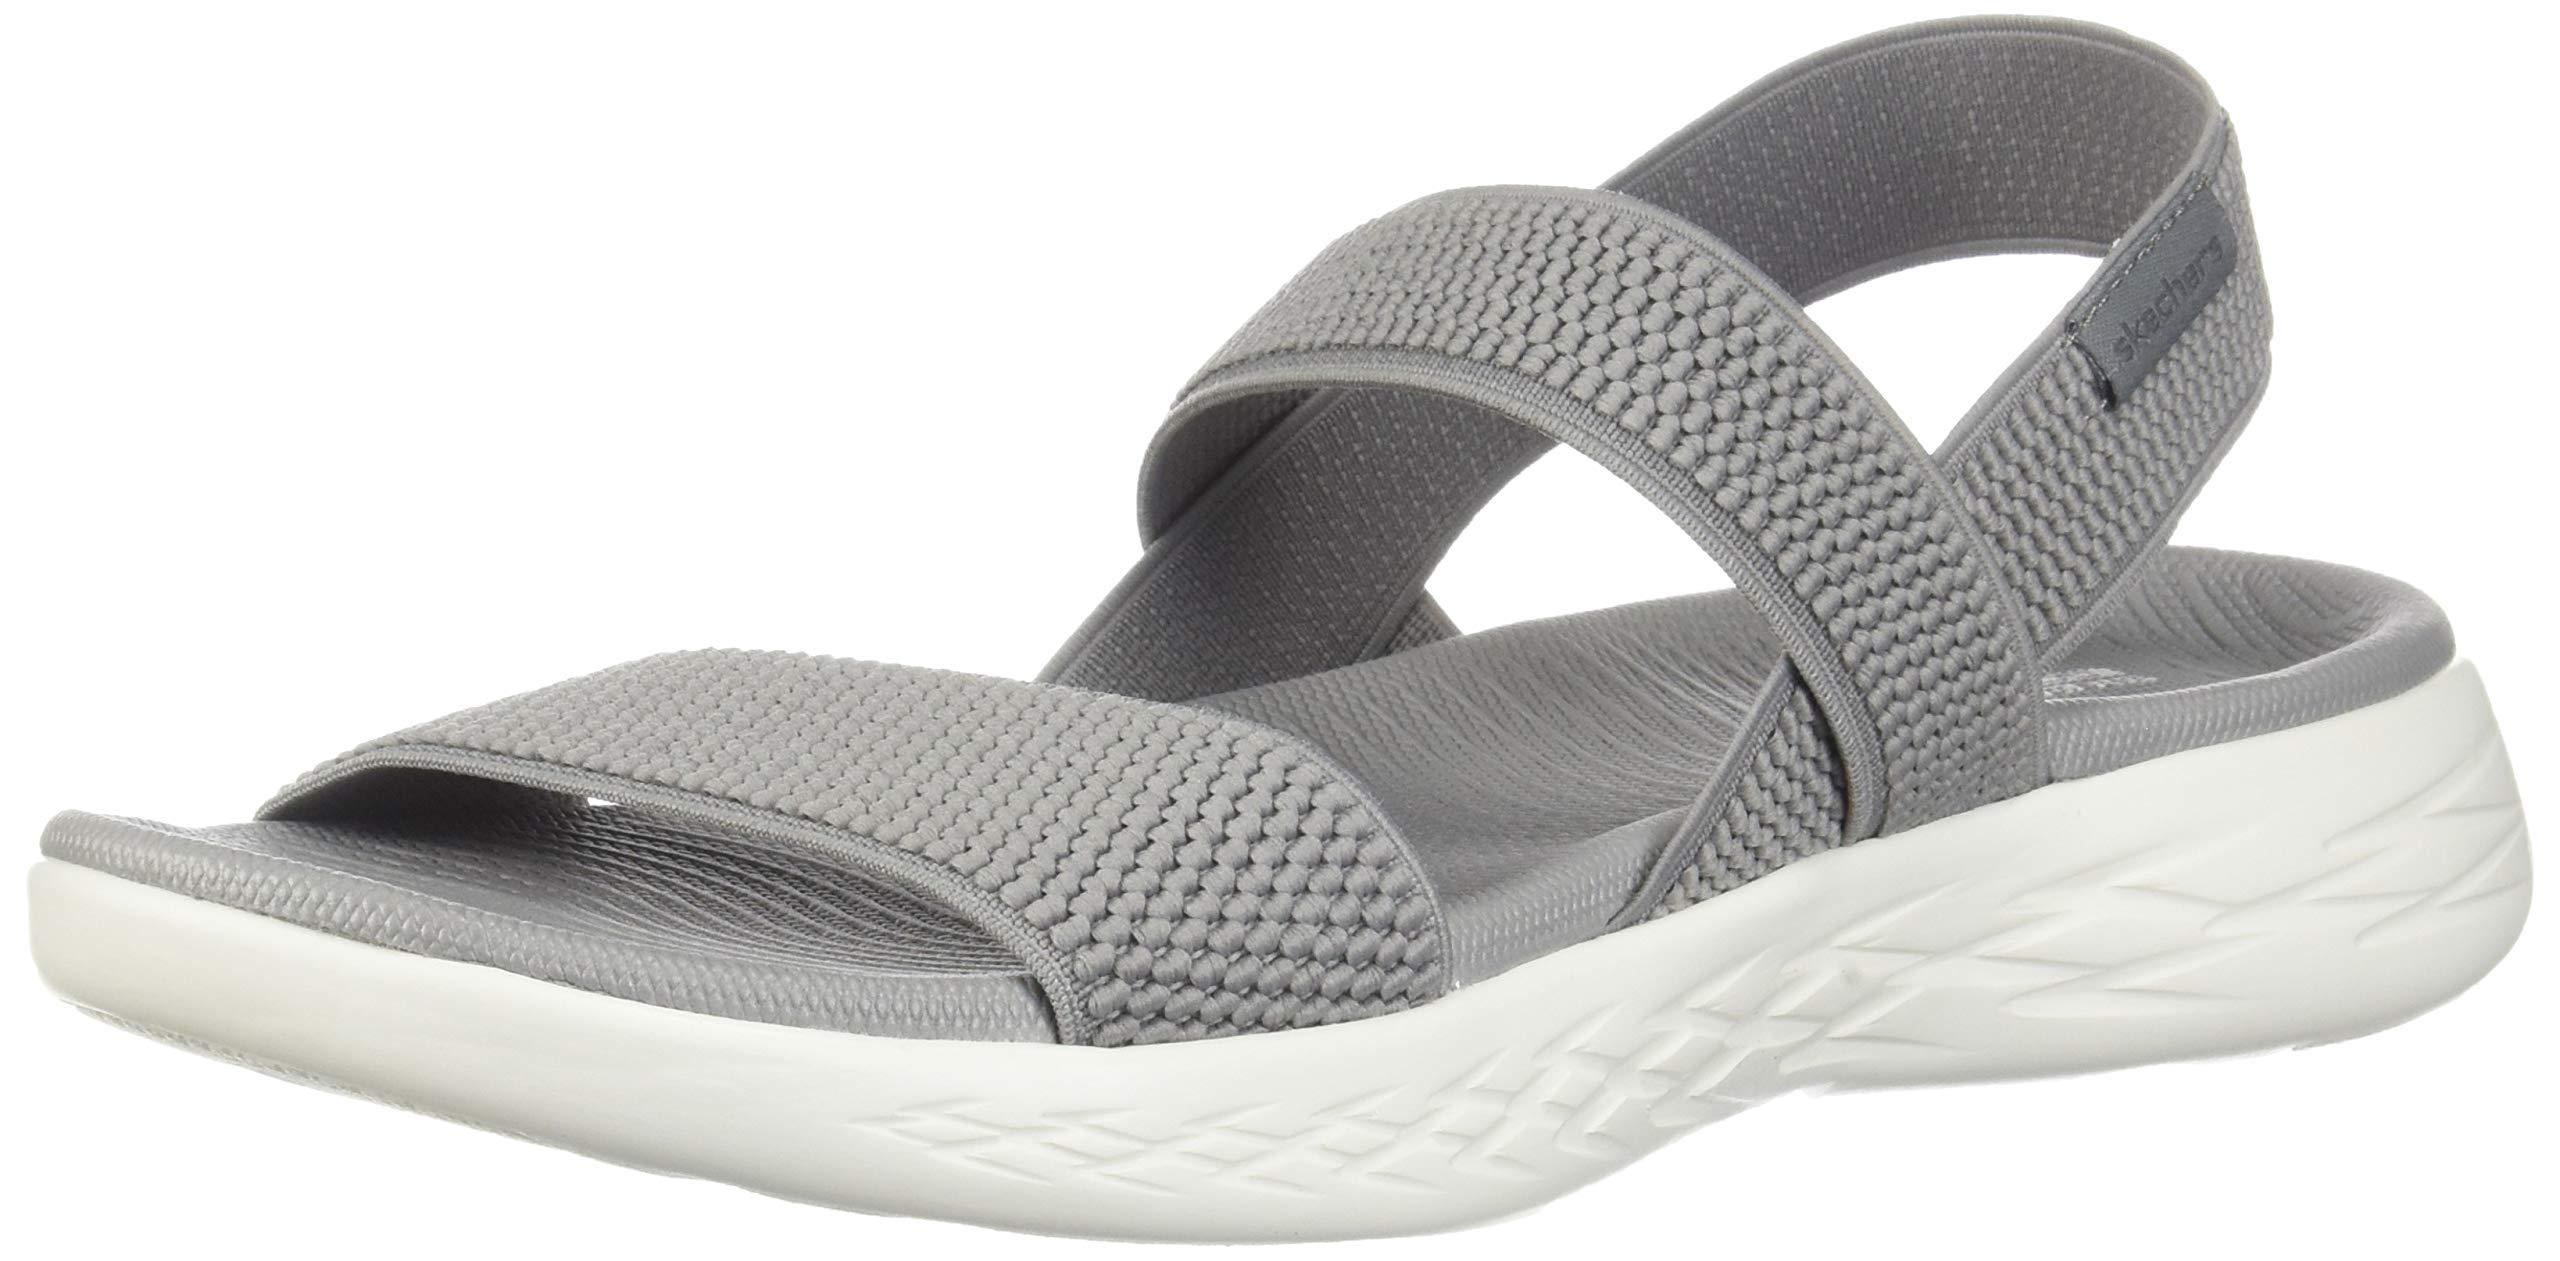 Skechers Ladies On The Go 600 Flawless Grey/white Strap Mule Sandals  15312/gyw-uk 4 in Gray/White (Gray) - Lyst